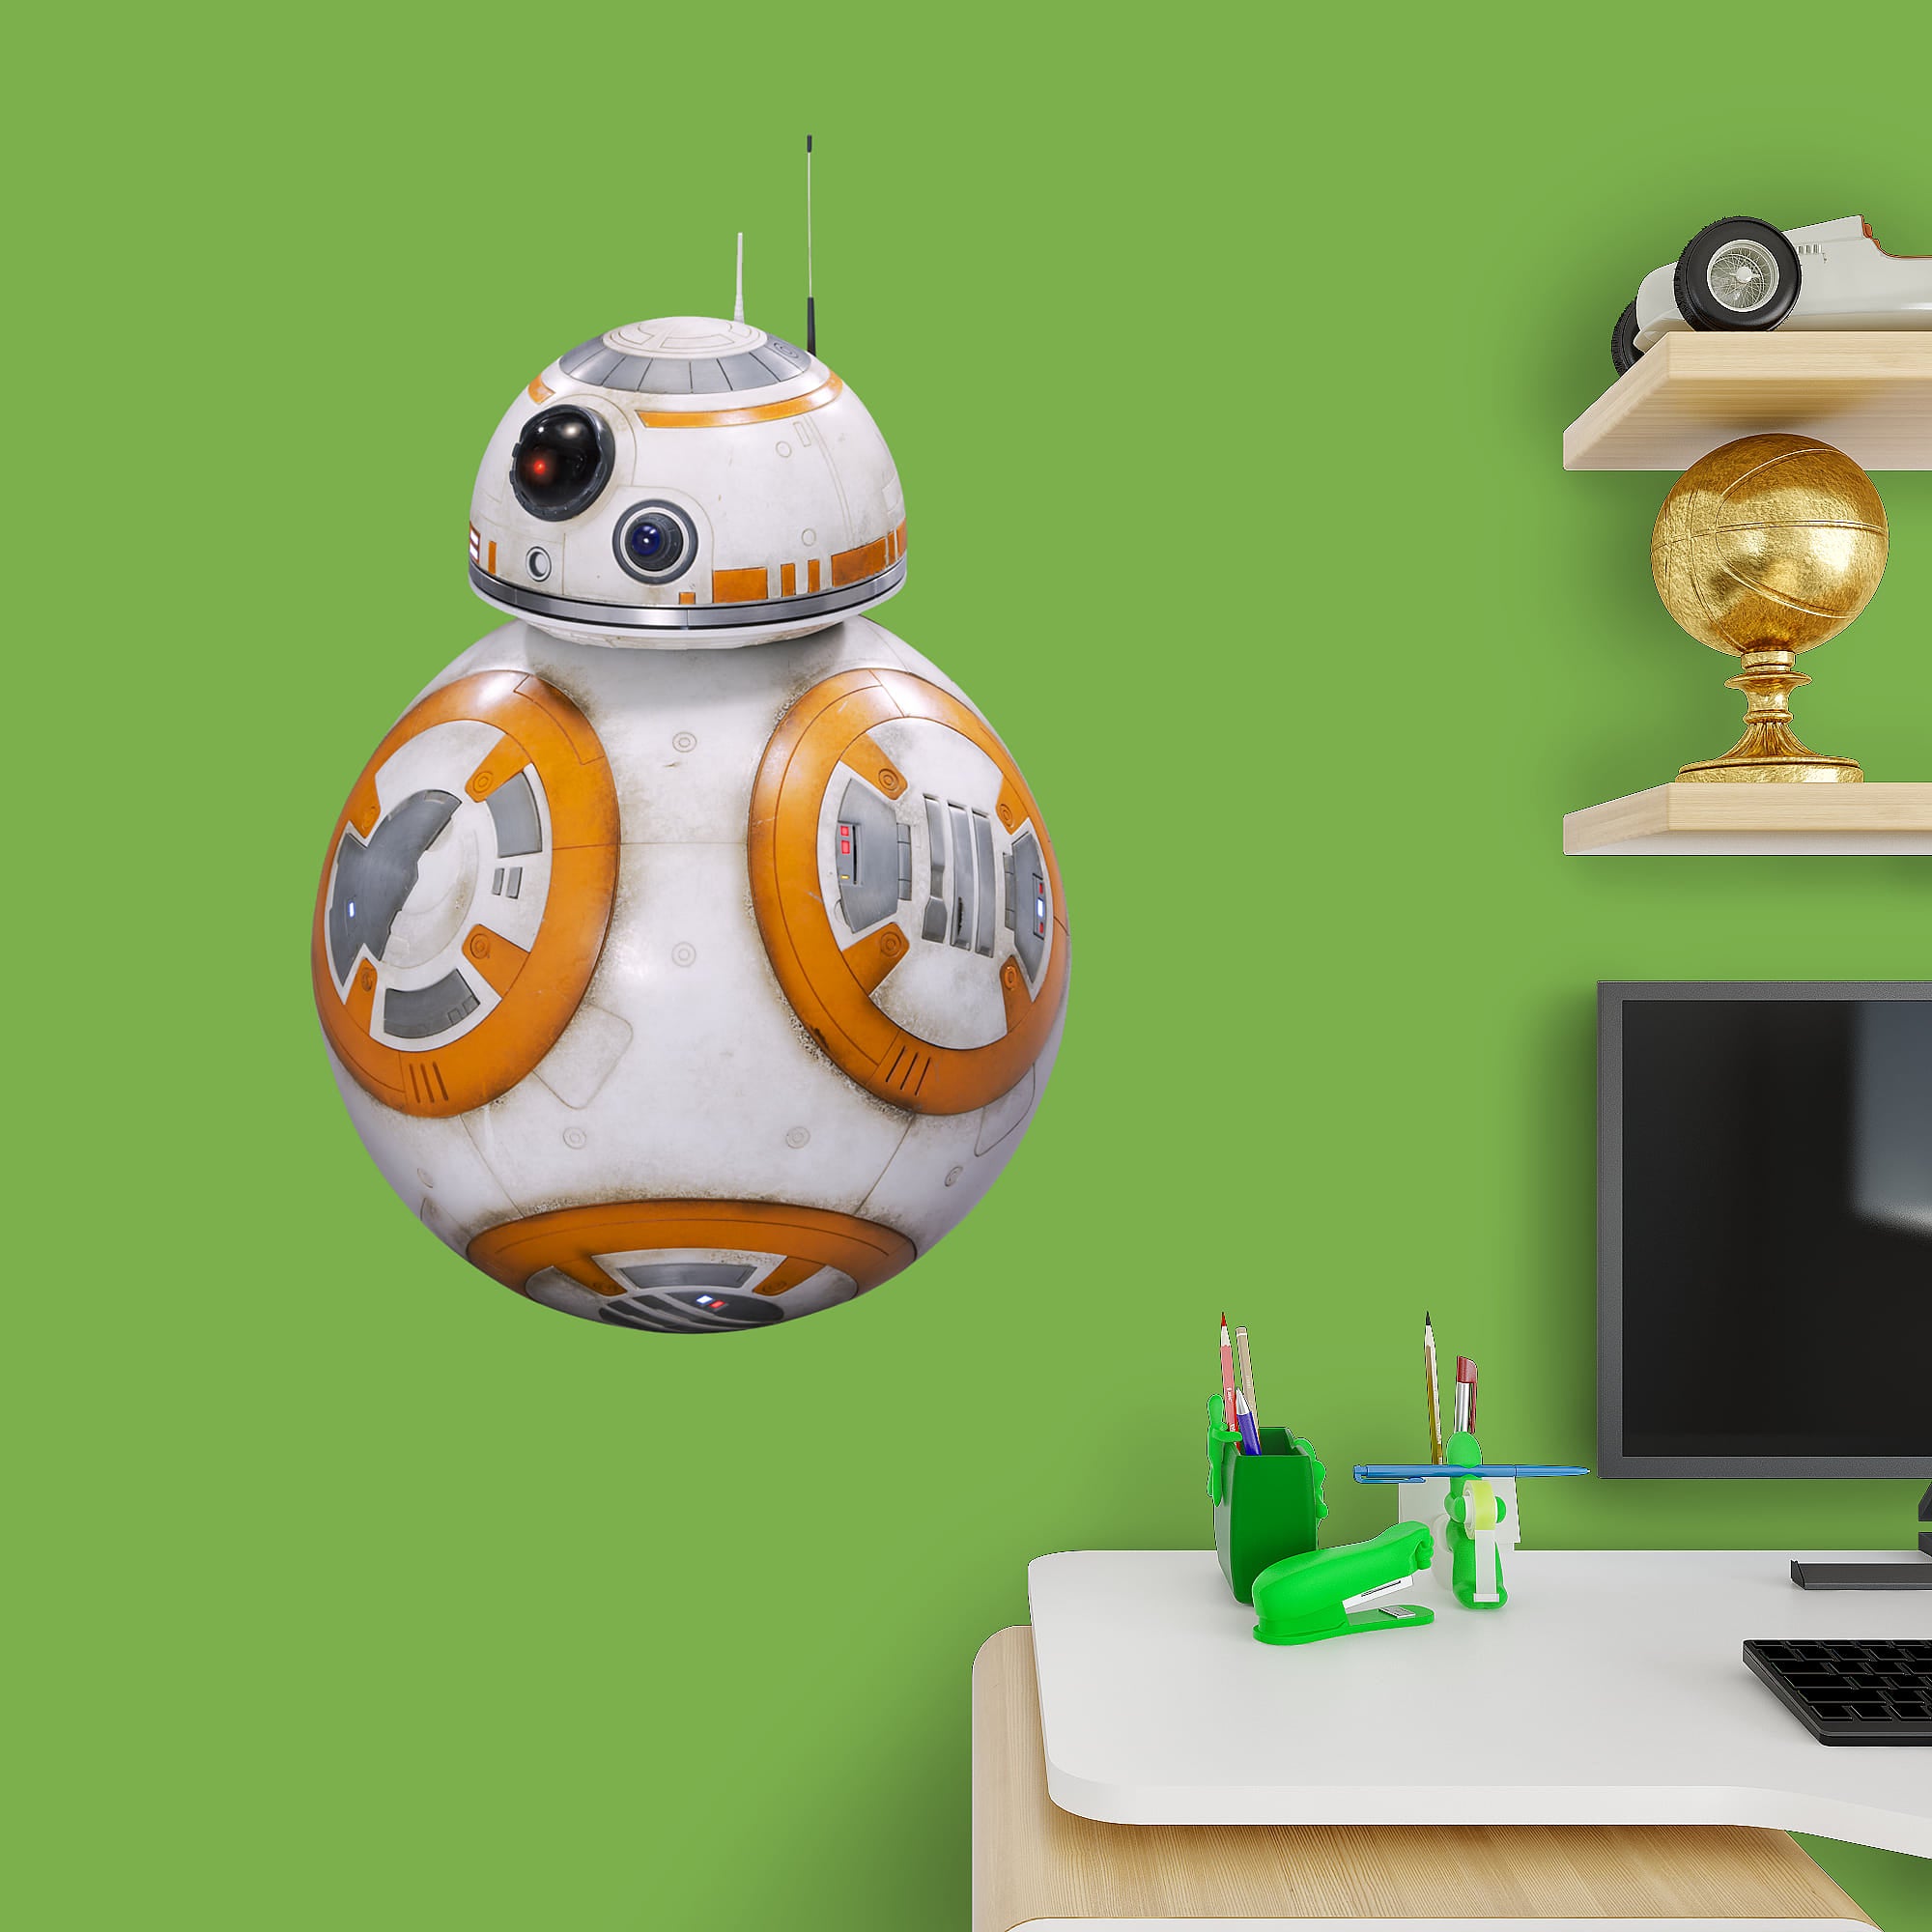 BB-8 - Officially Licensed Removable Wall Decal 24.0"W x 37.0"H by Fathead | Vinyl